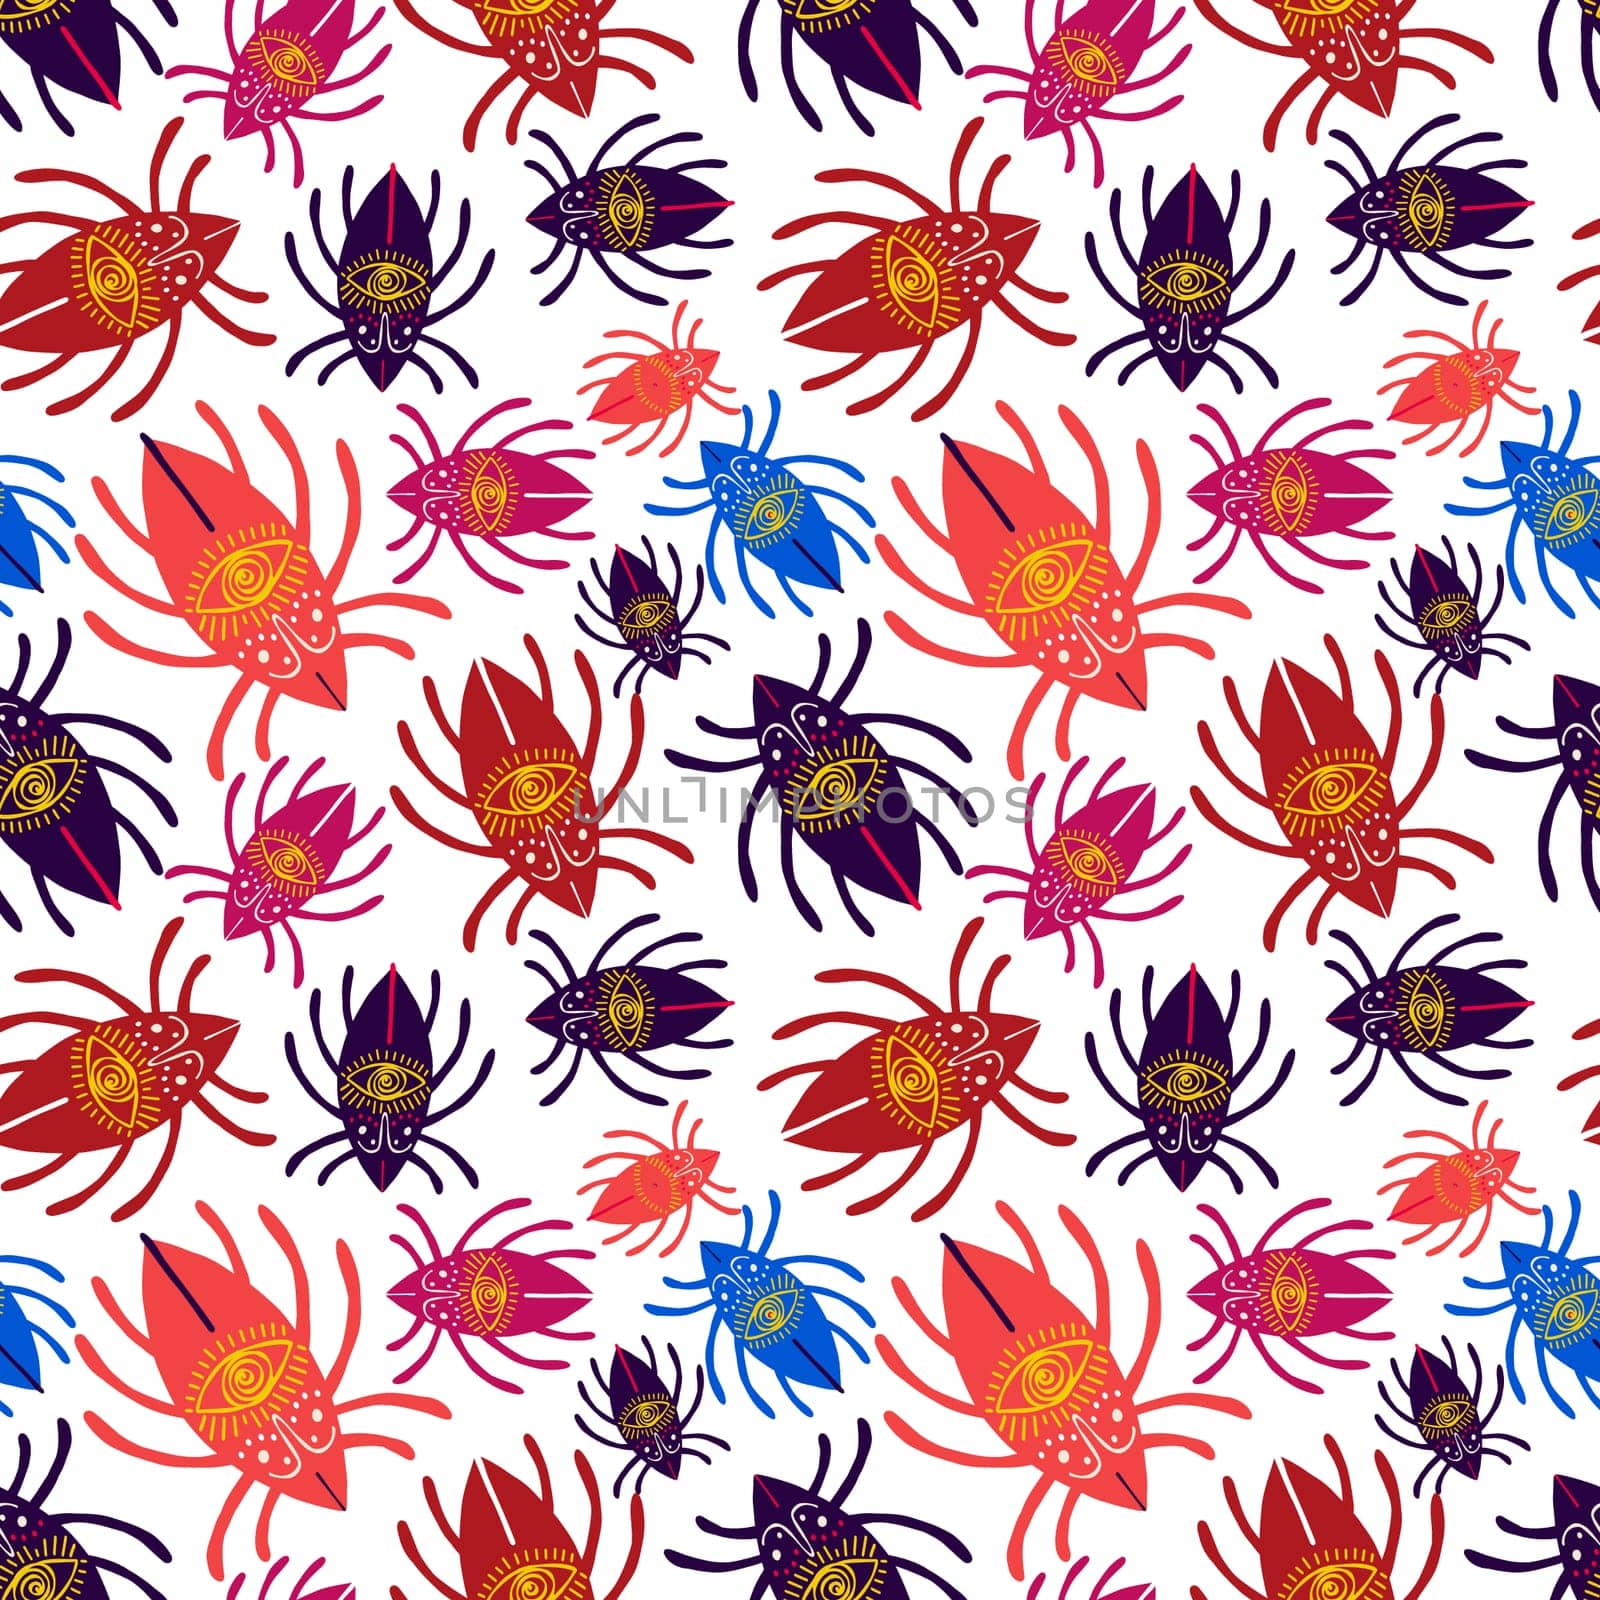 A colorful pattern of insects with eyes on their heads. The insects are in various colors and sizes, and they are arranged in a way that creates a sense of movement and energy